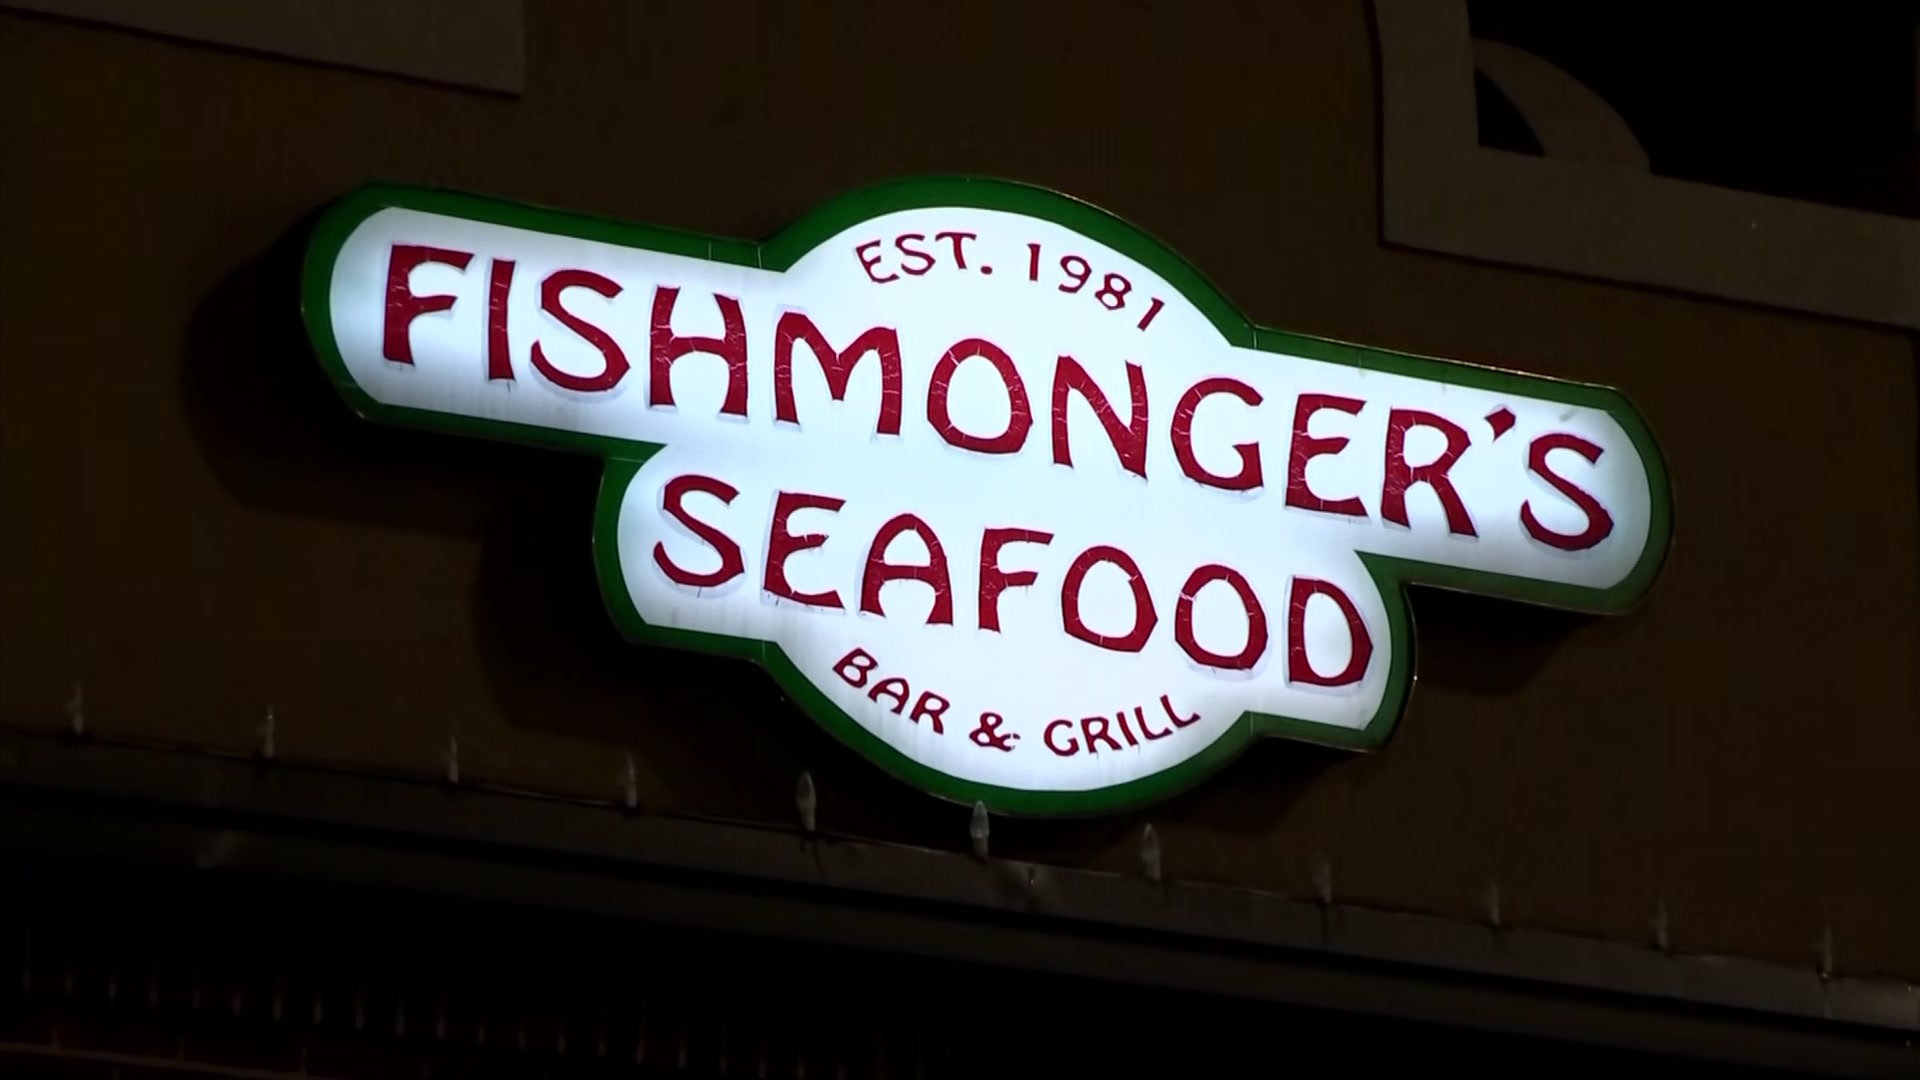 Beloved Plano Restaurant Fishmonger's Seafood Closes After 41 Years